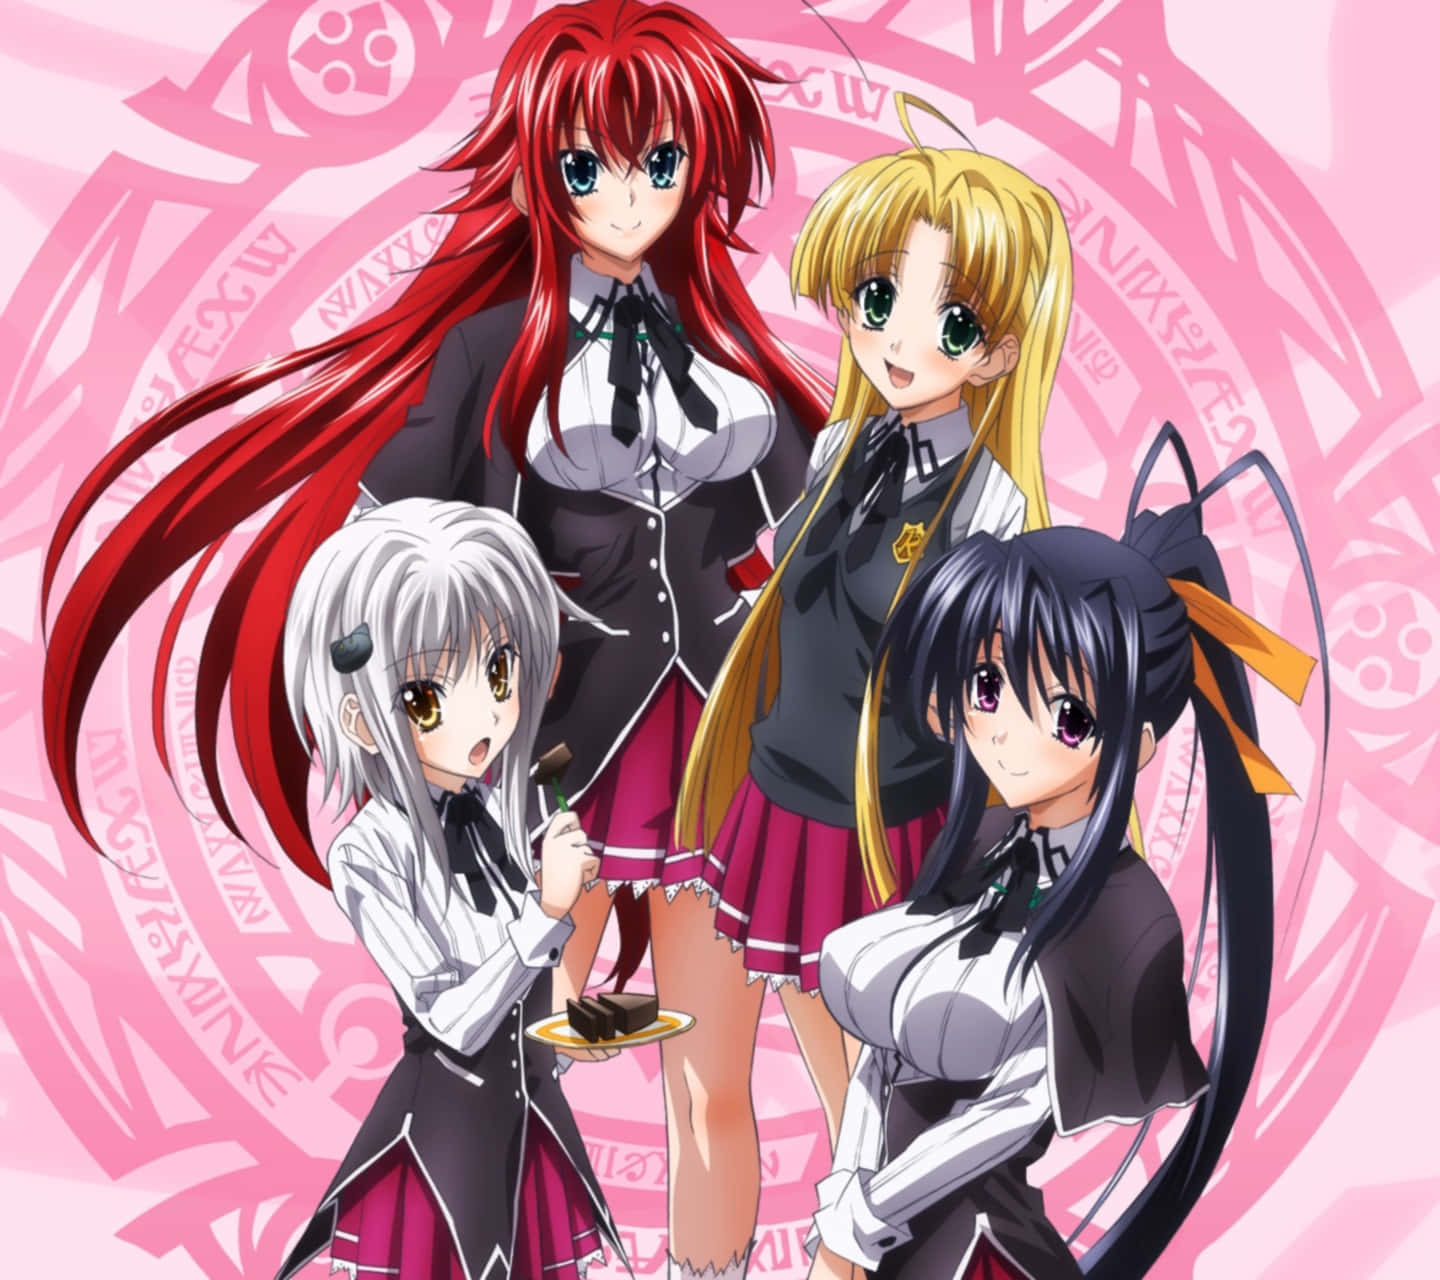 Enjoy the action-packed adventures of Highschool Dxd!